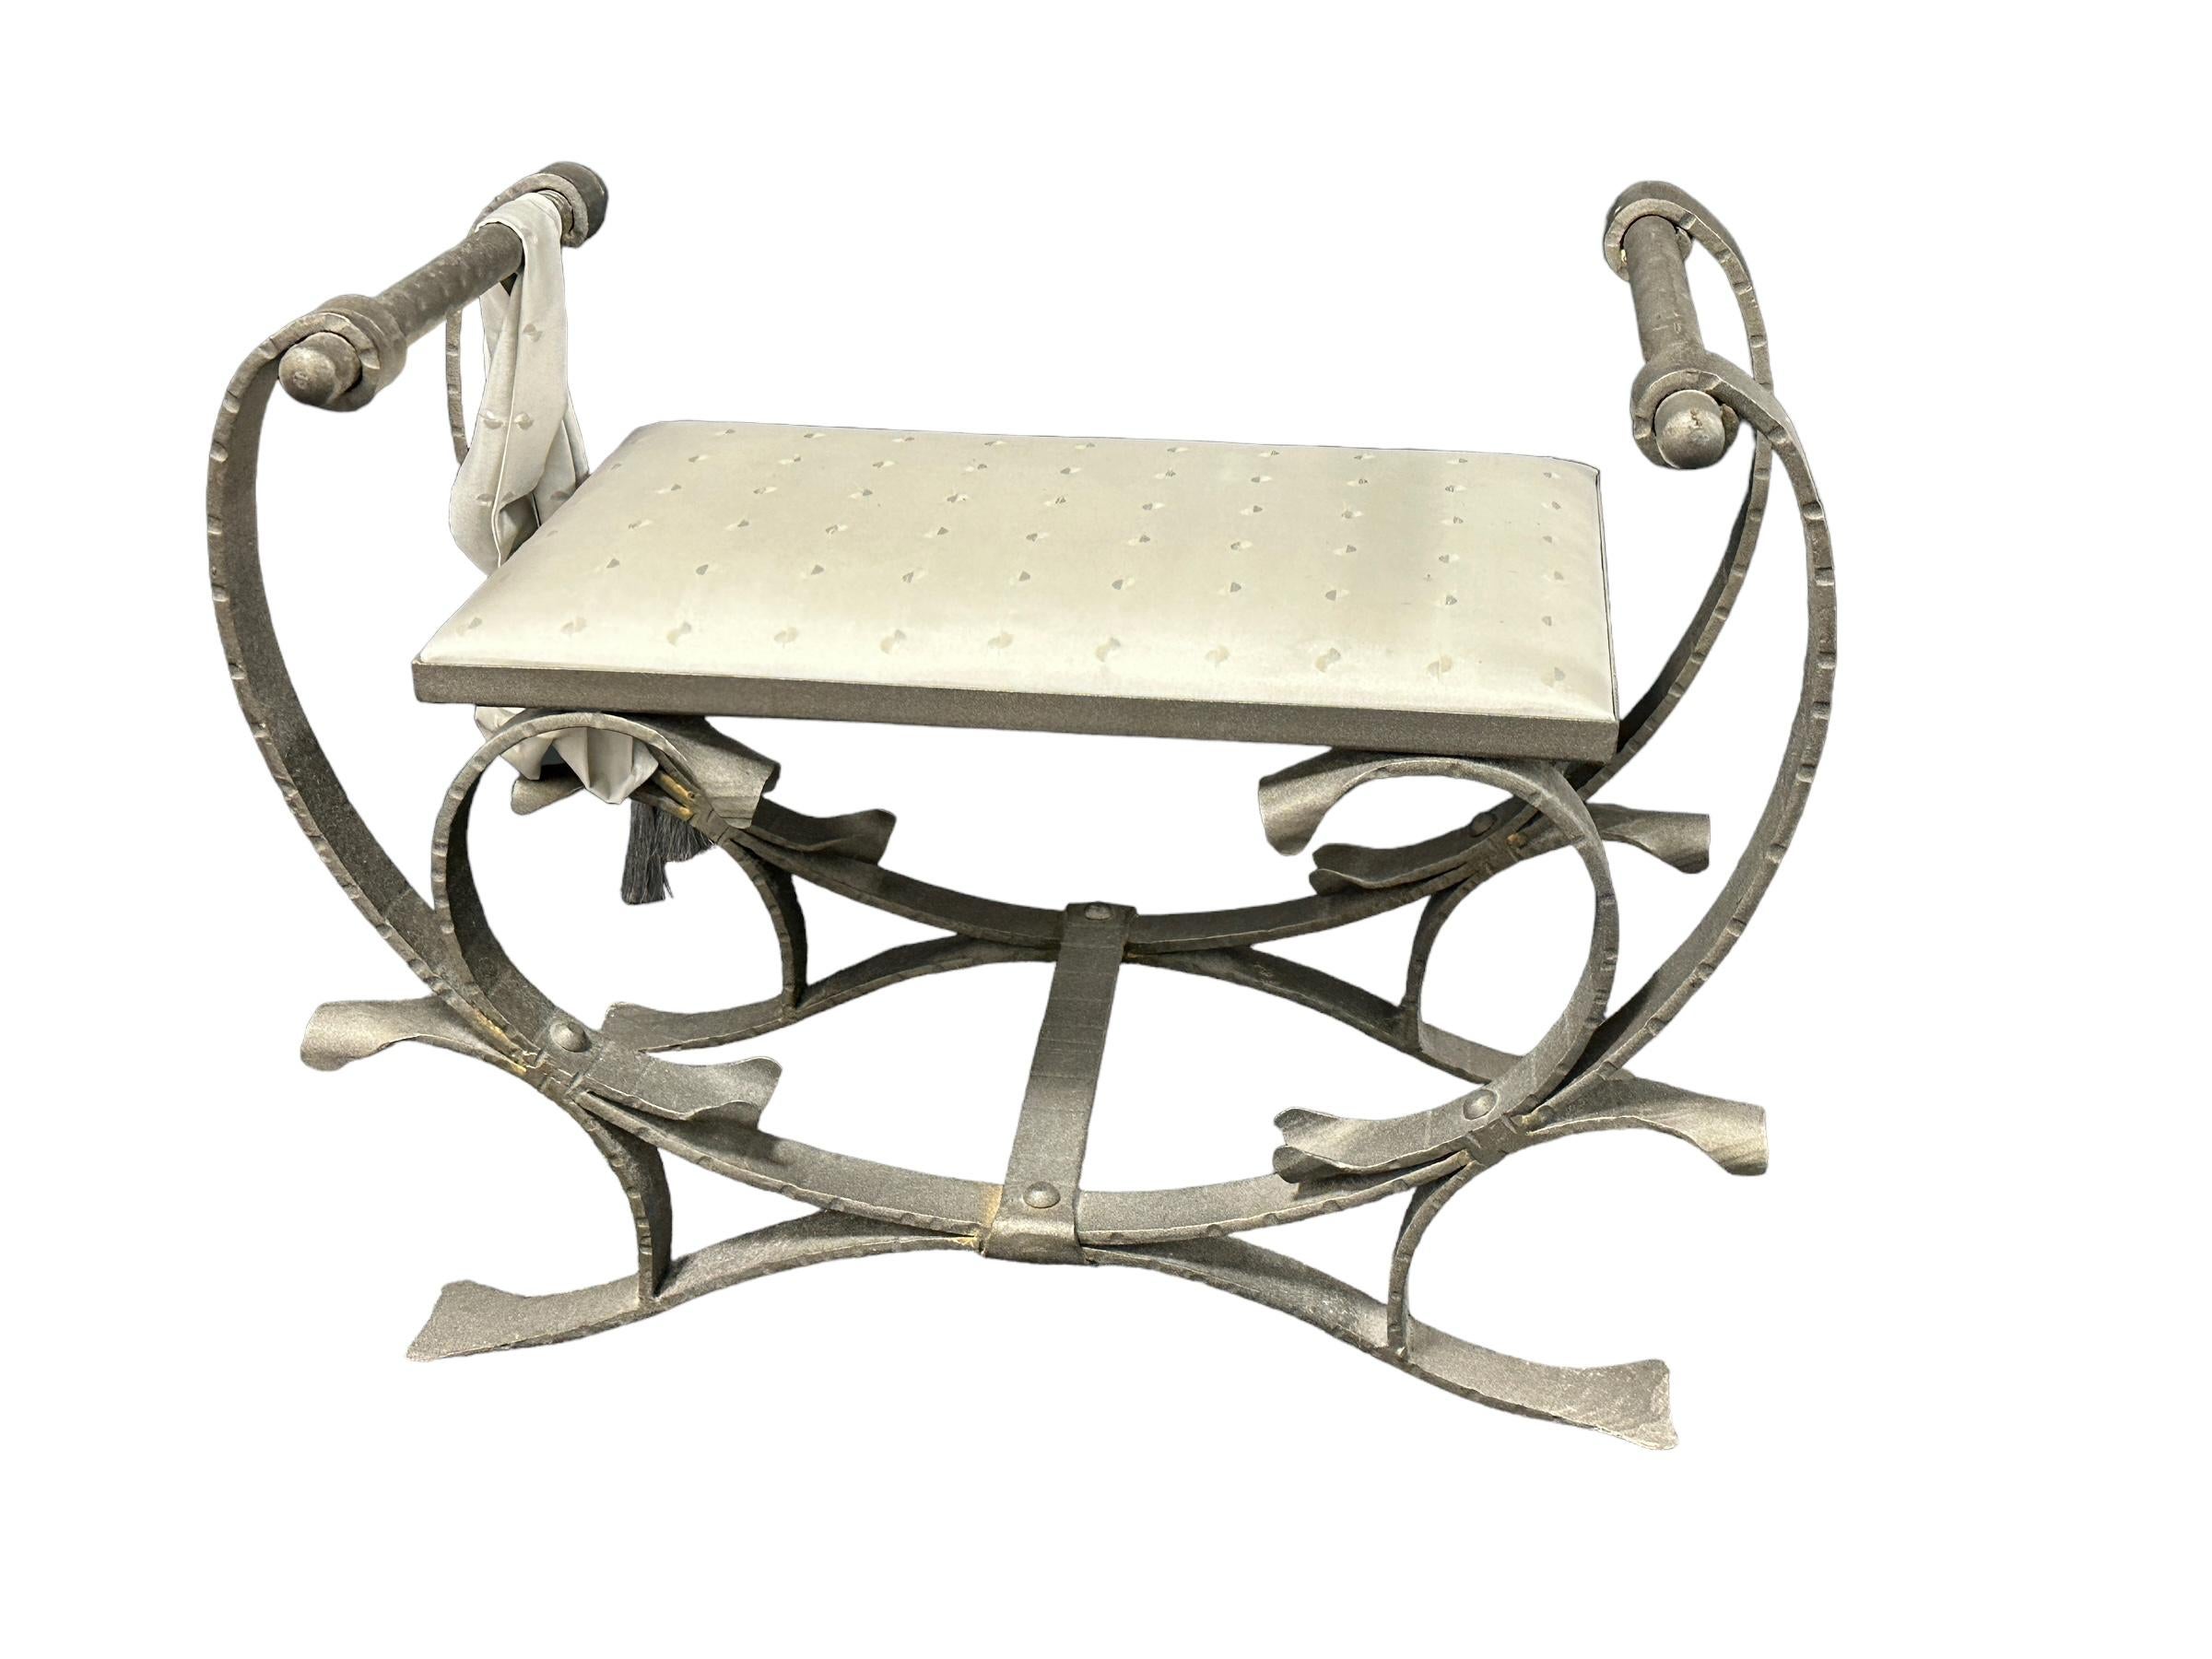 Classic 1960s heavy wrought iron stool bench. Nice addition to your room, entry hall or vanity room. Made of metal and a satin covered plate. Found at an estate sale in Nuremberg, Germany.